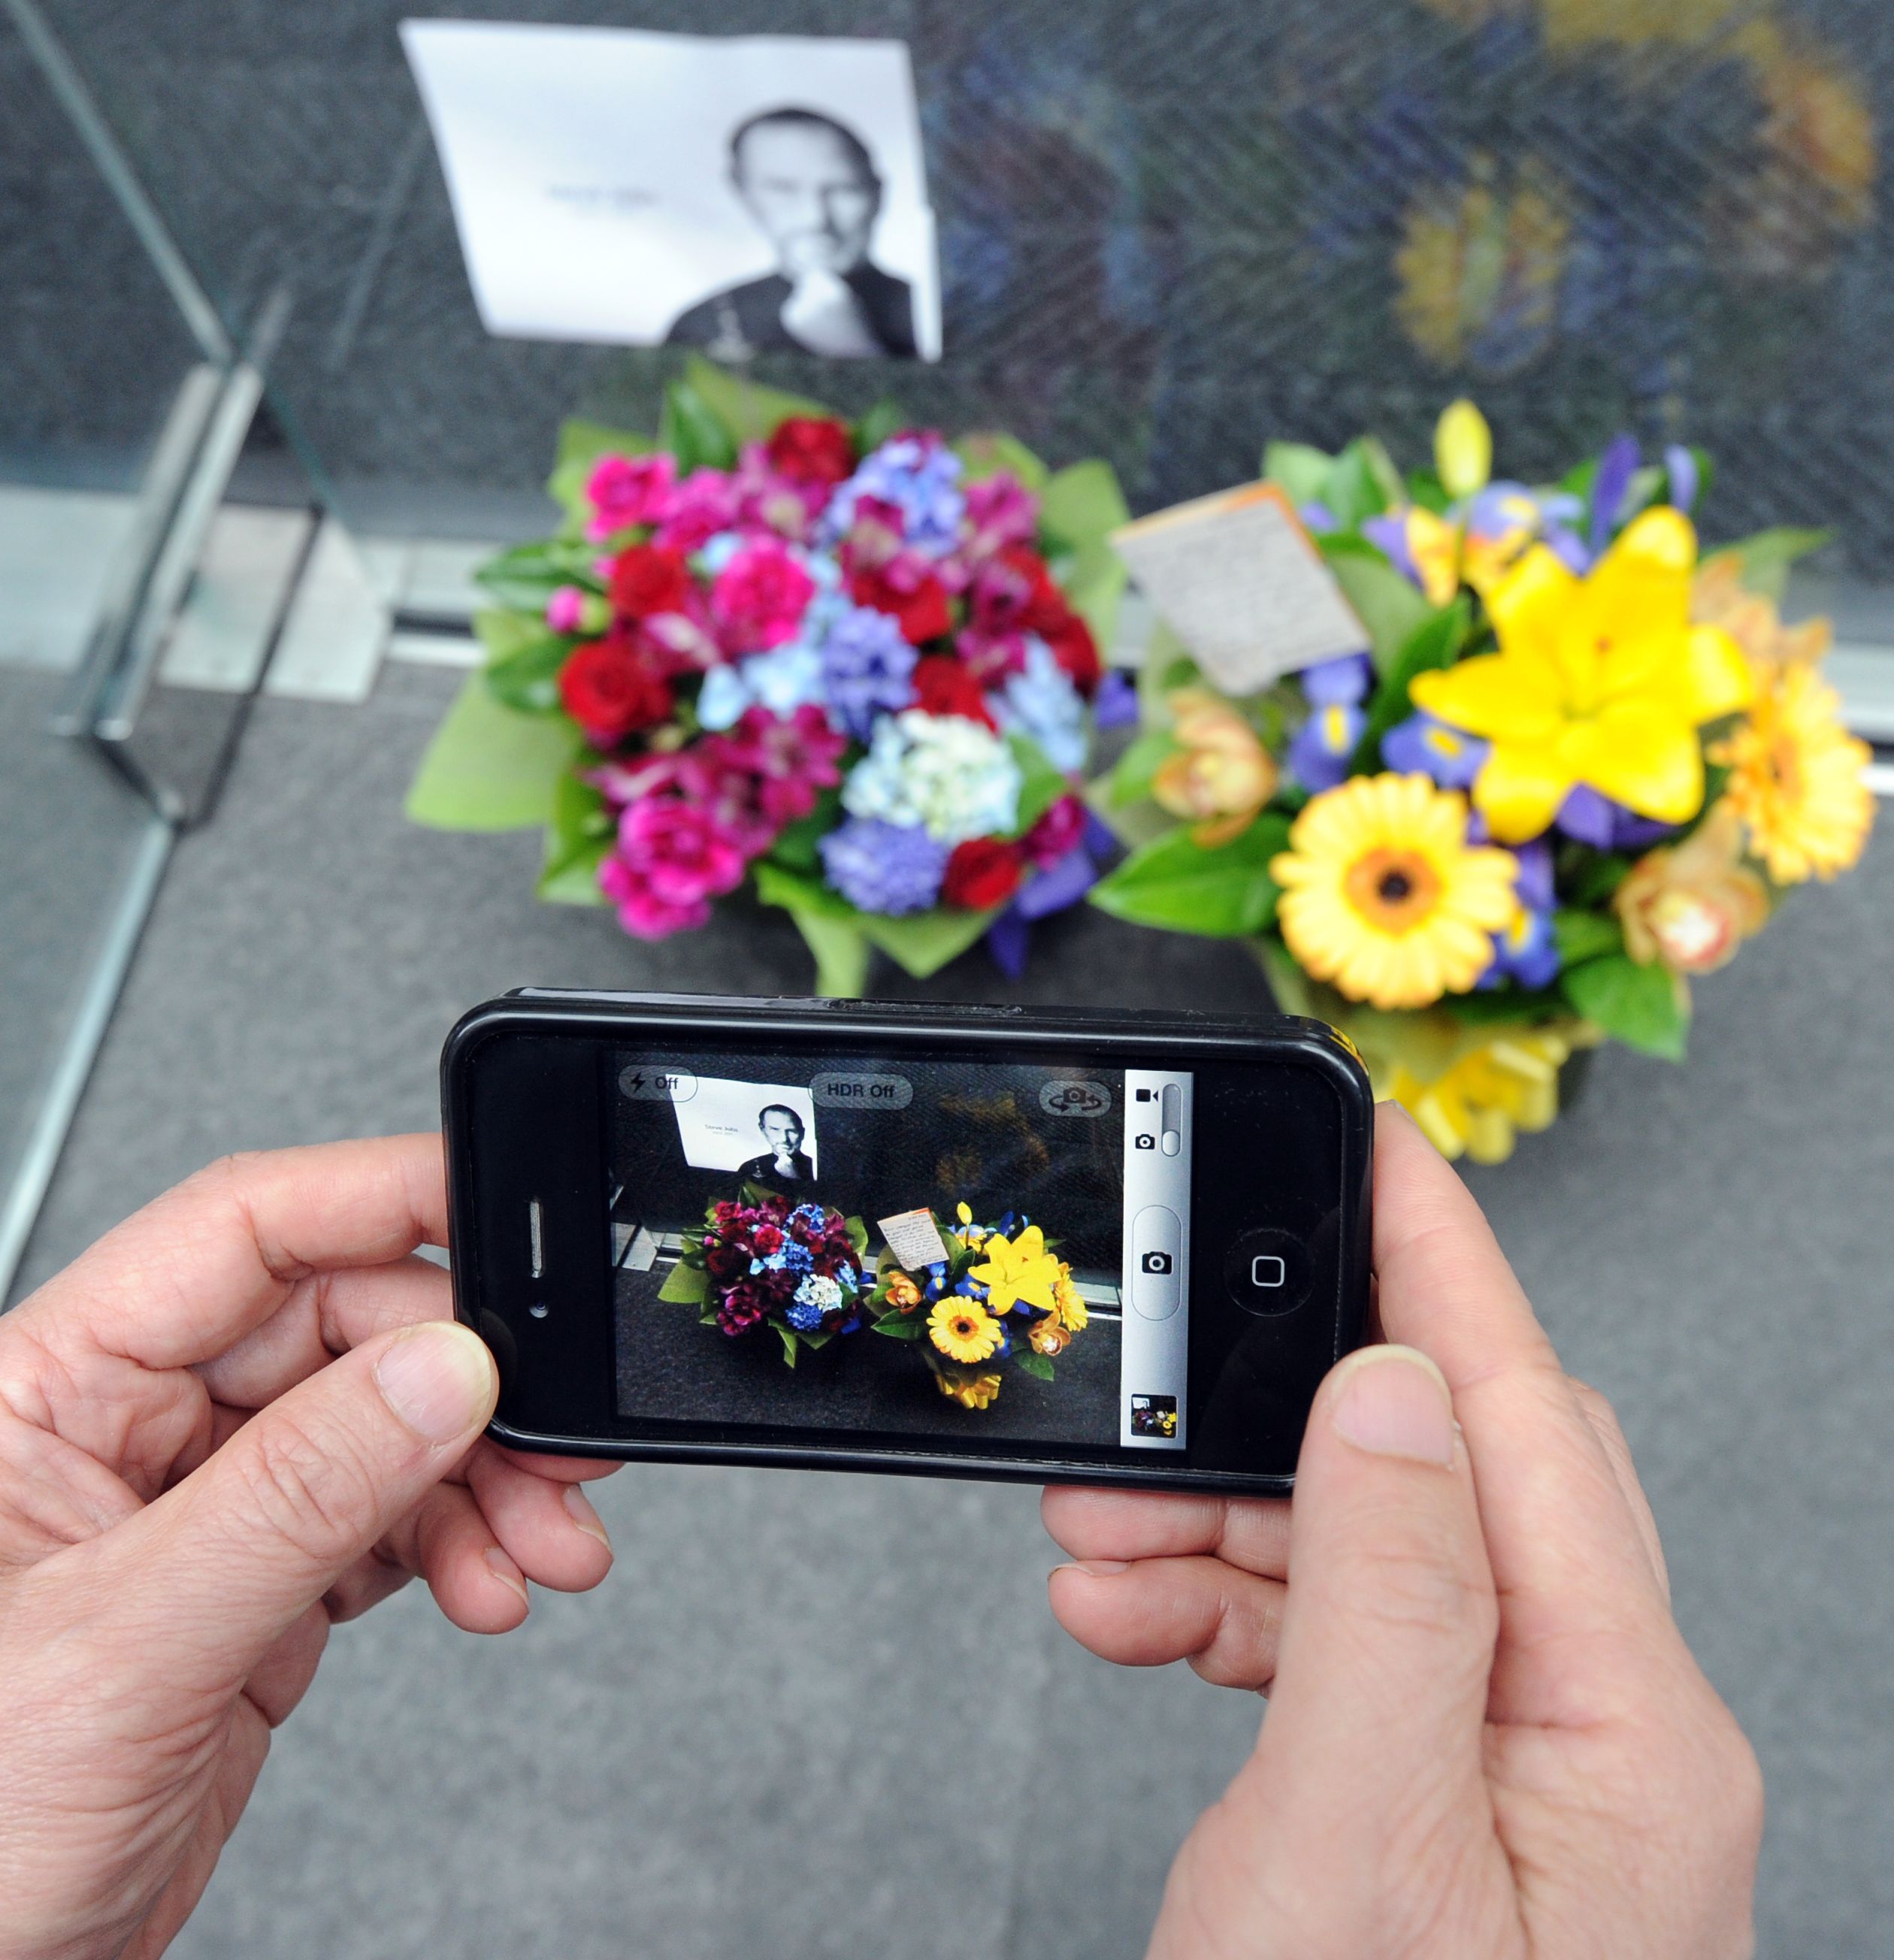 A passerby uses an iPhone 4 to photograph flowers left for the late Steve Jobs, co-founder of Apple, outside the Apple store in Sydney on October 6, 2011.